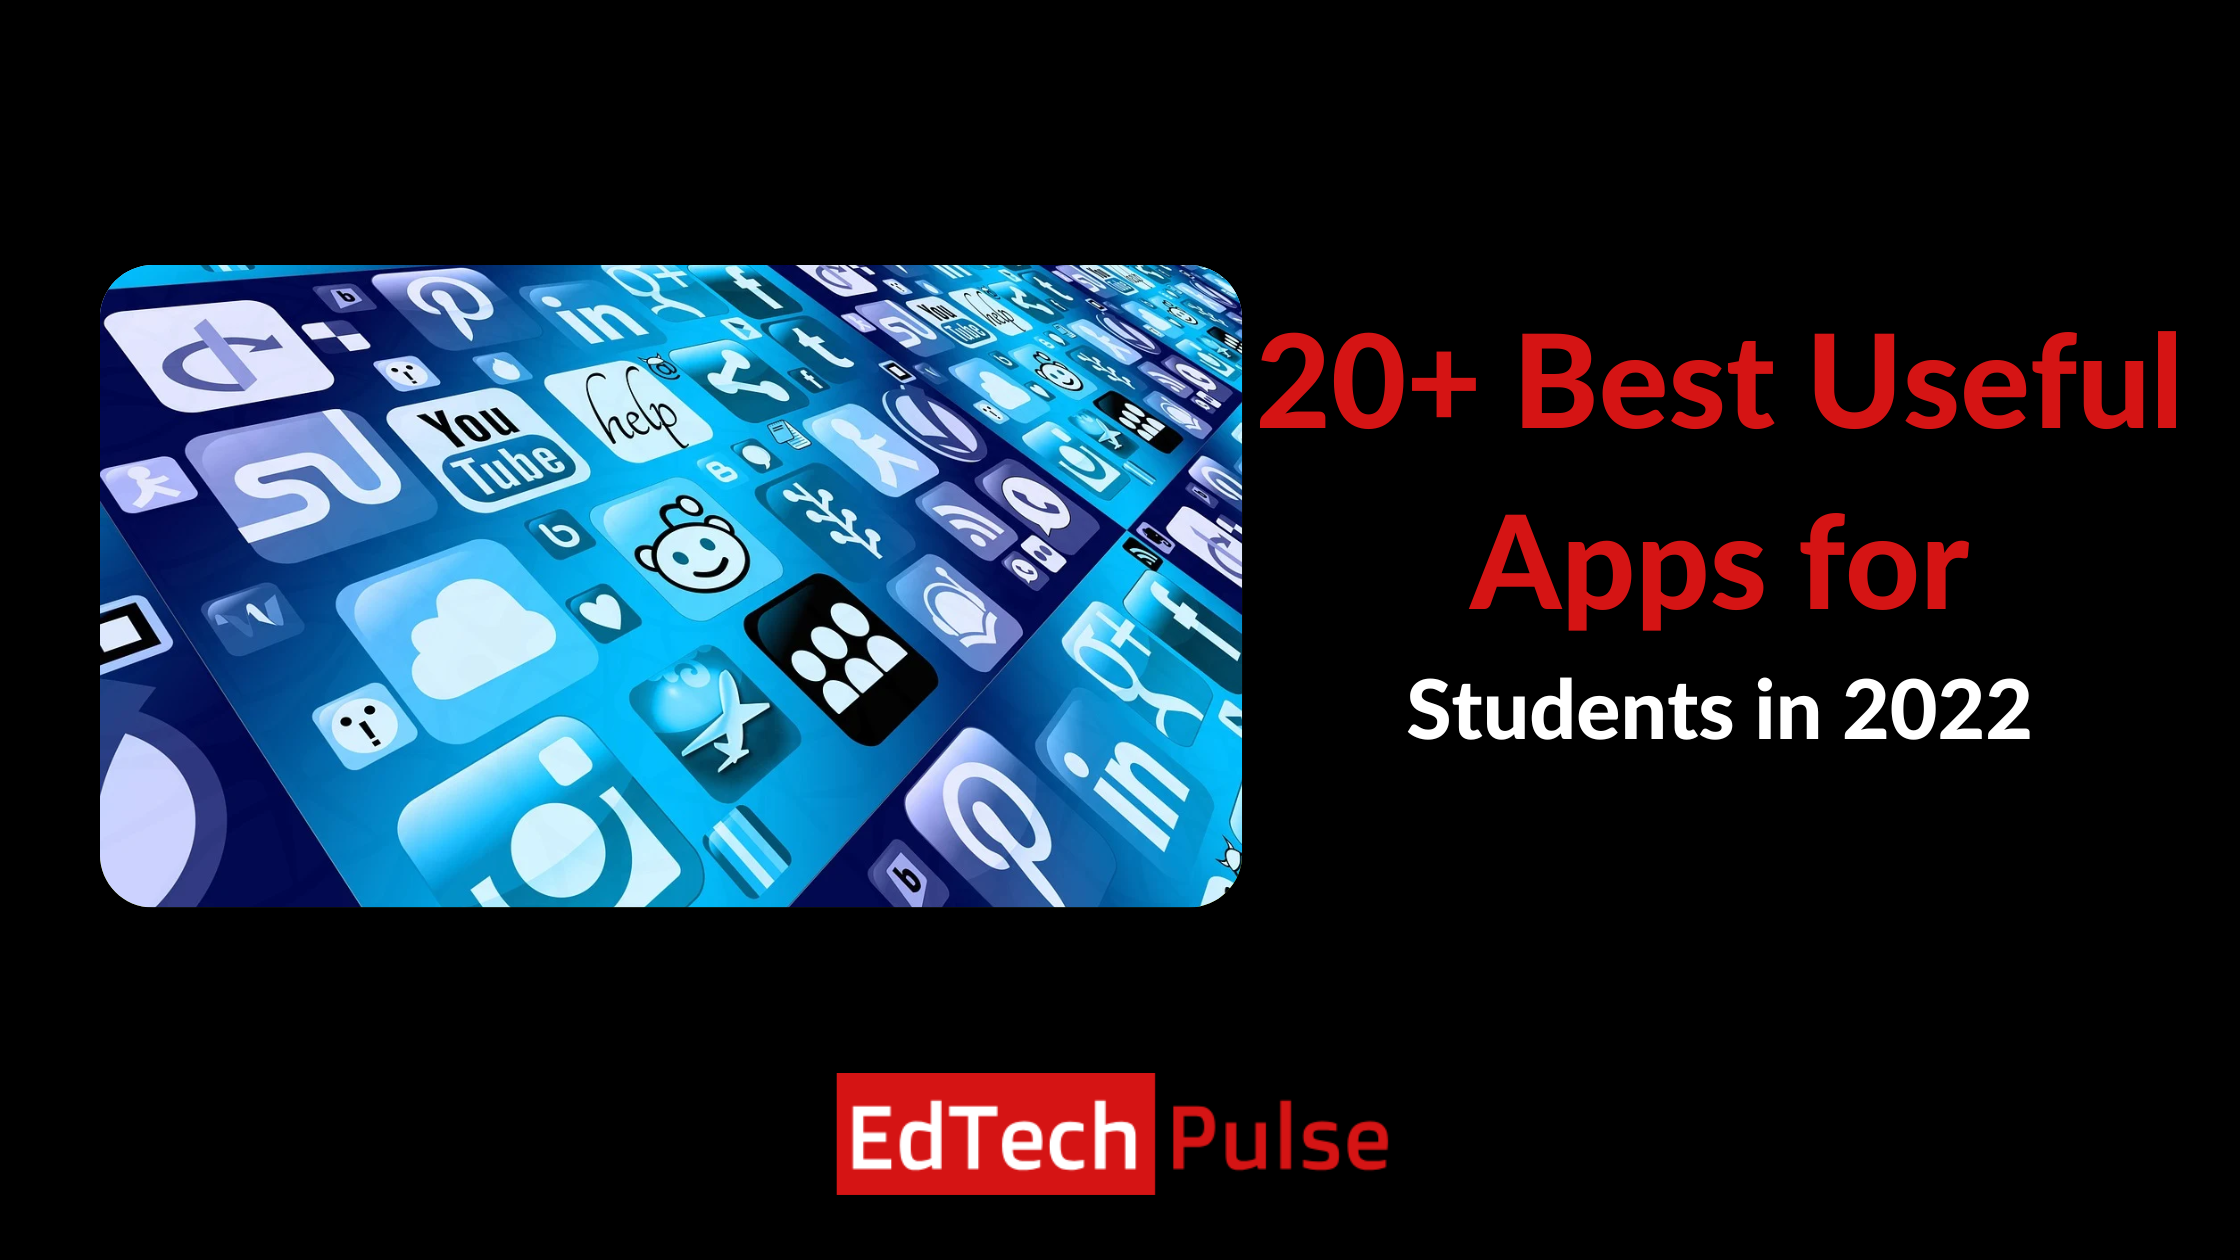 20+ Best Useful Apps for Students in 2022